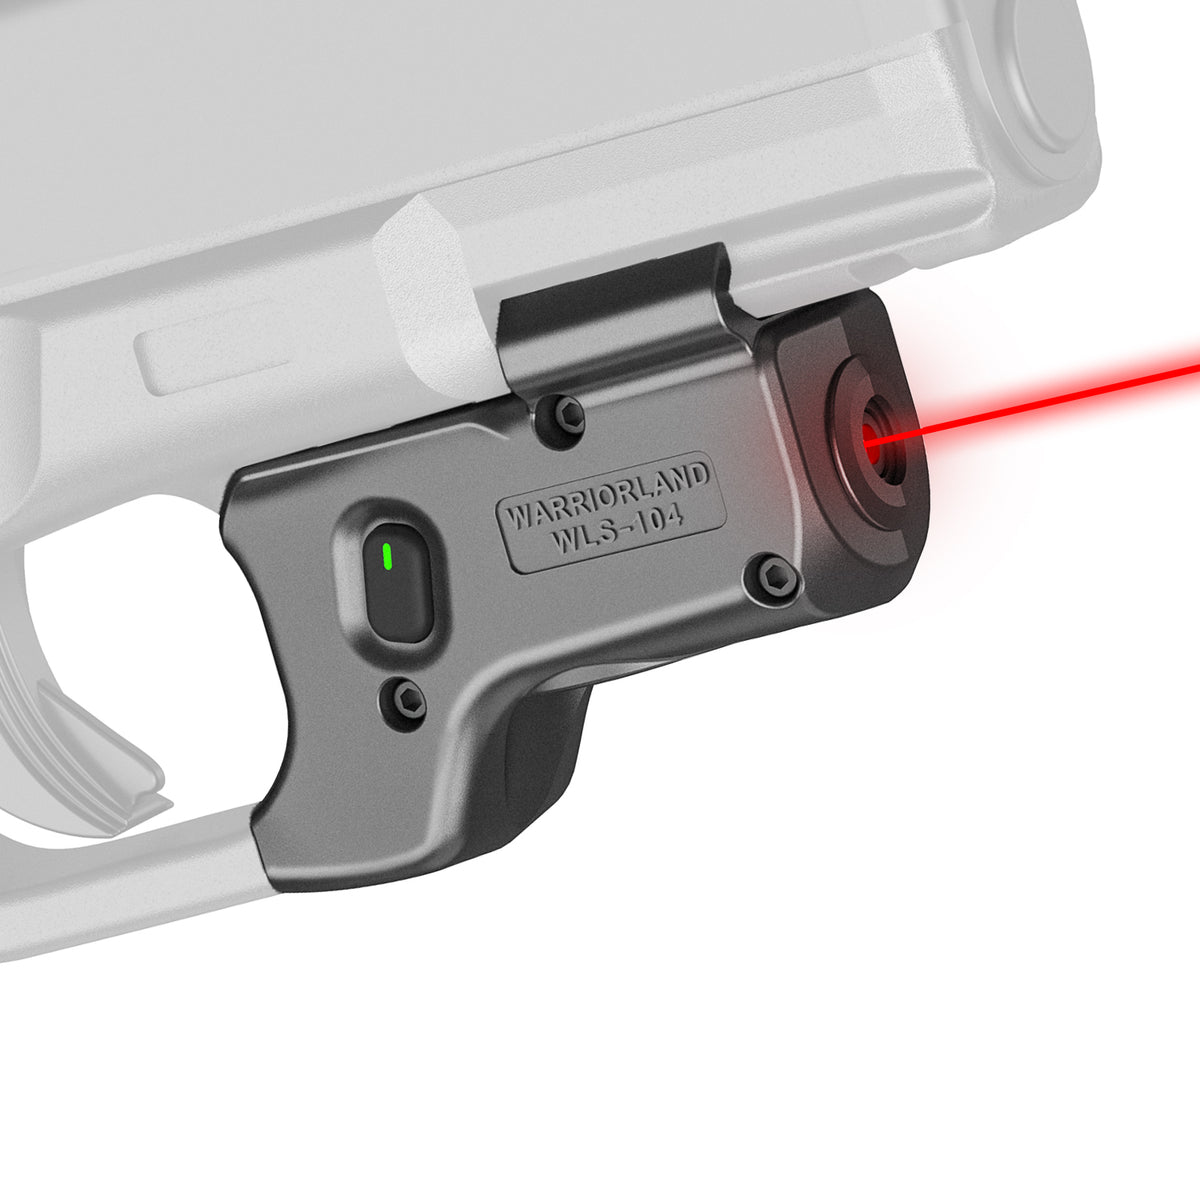 Red Laser Sight Compatible with Glock 17/19 Gen 3-5, G23/31/32 Gen 3-4 & G19X/44/45, Ultra Compact G19 Beam Sight, Gun Sight with Ambidextrous On/Off Switch & Power Indicator, WLS-104|WARRIORLAND